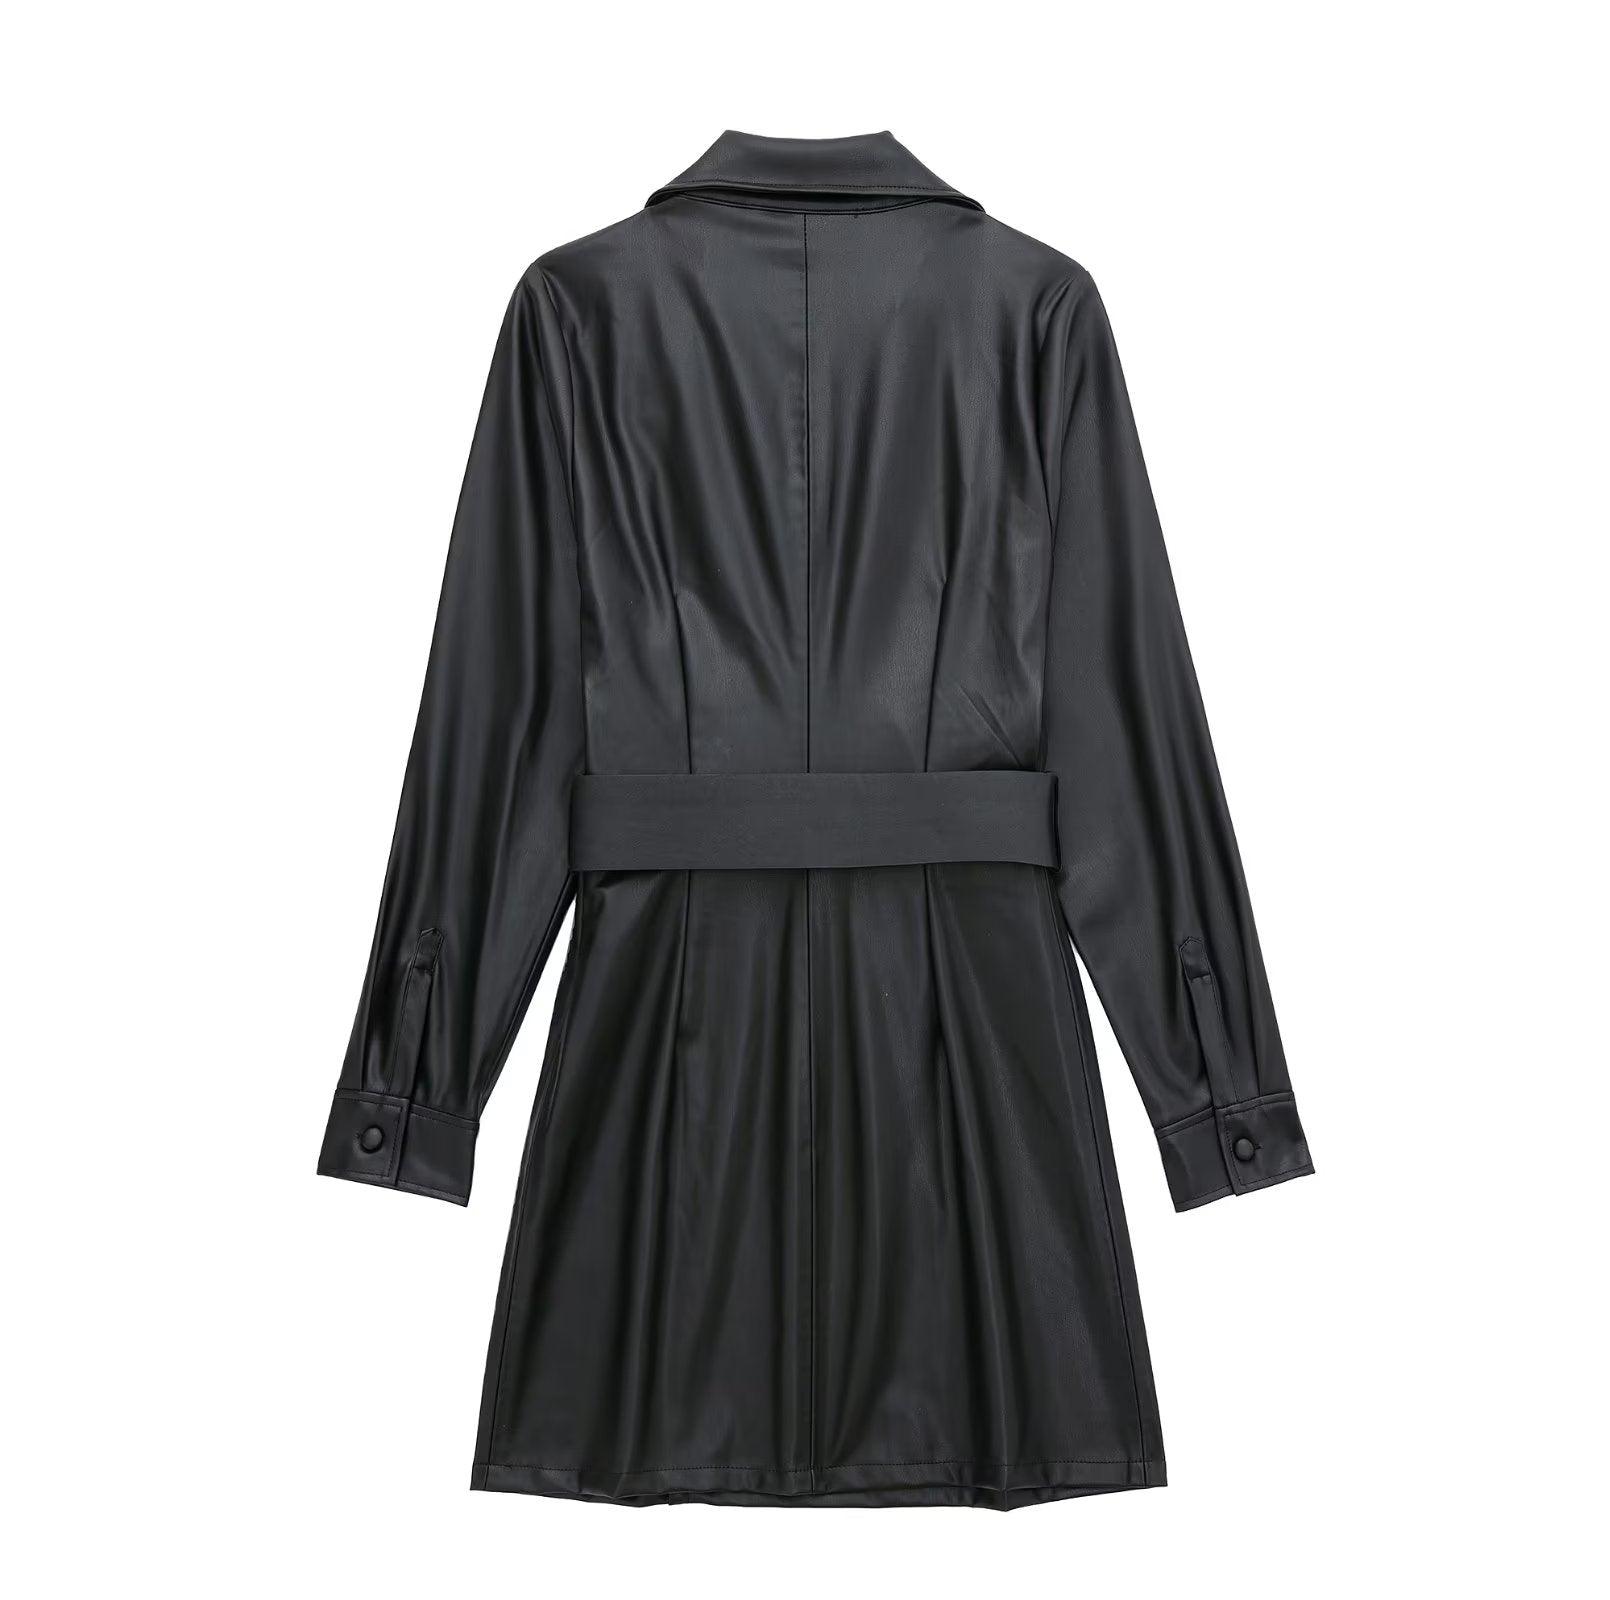 Make a Statement with our Faux Leather Blazer Dress - ForVanity dress, Office Dress Office Dress